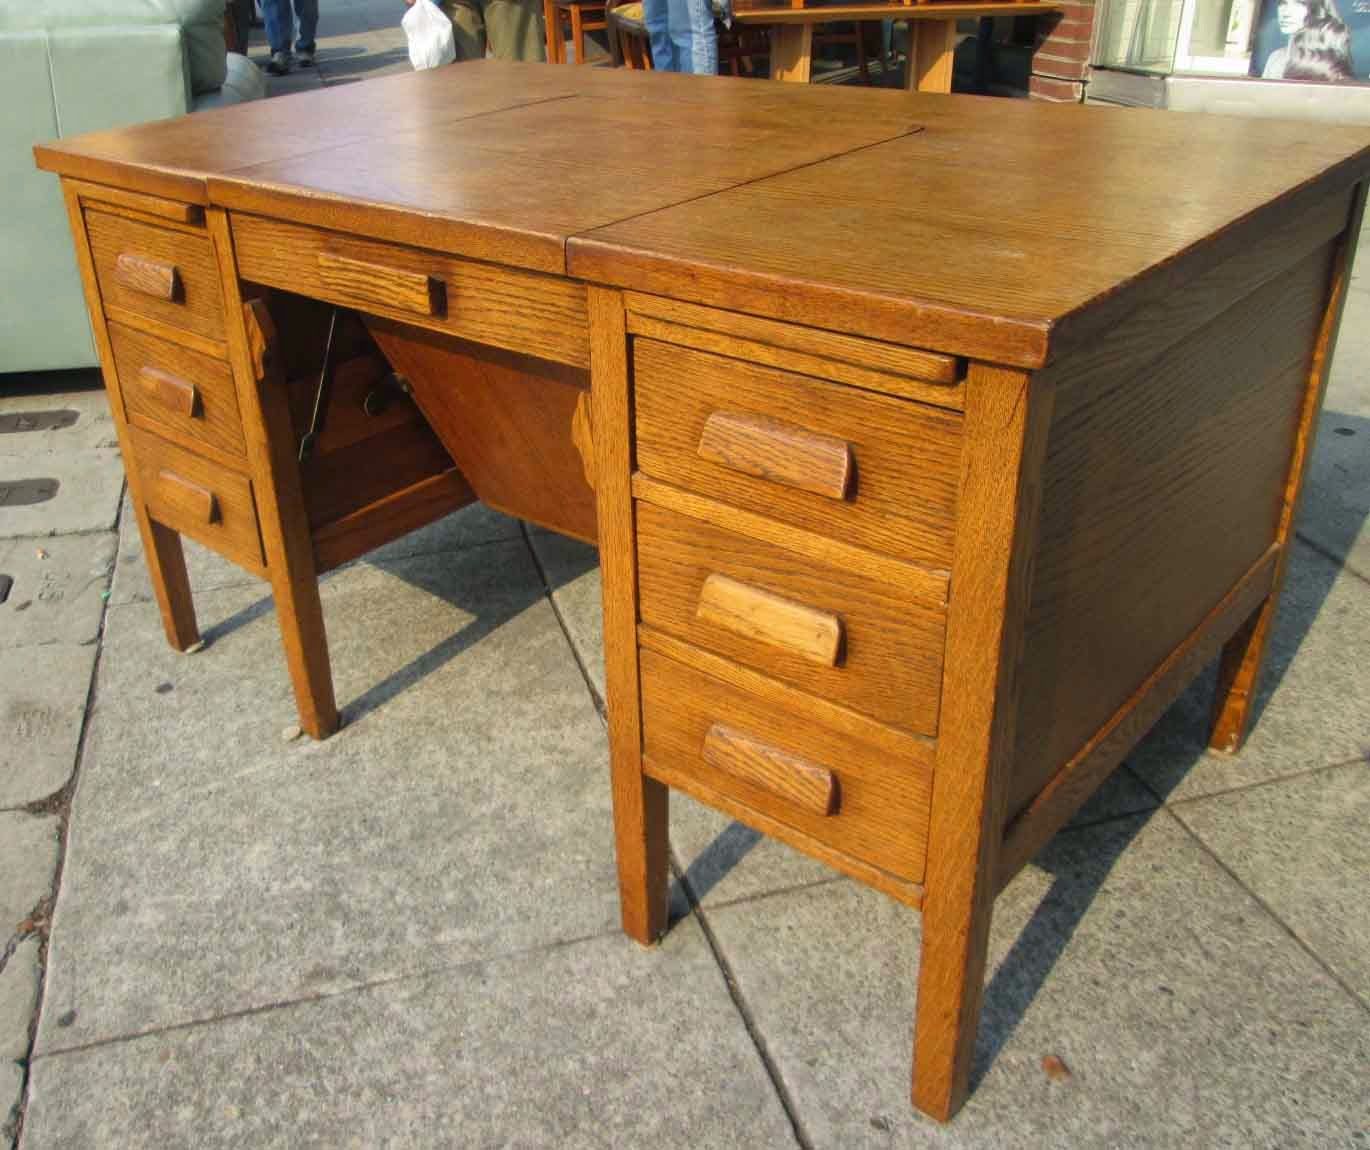 Uhuru Furniture & Collectibles: Sold Antique Oak Writing Desk – $95 Within Reclaimed Oak Leaning Writing Desks (View 1 of 15)